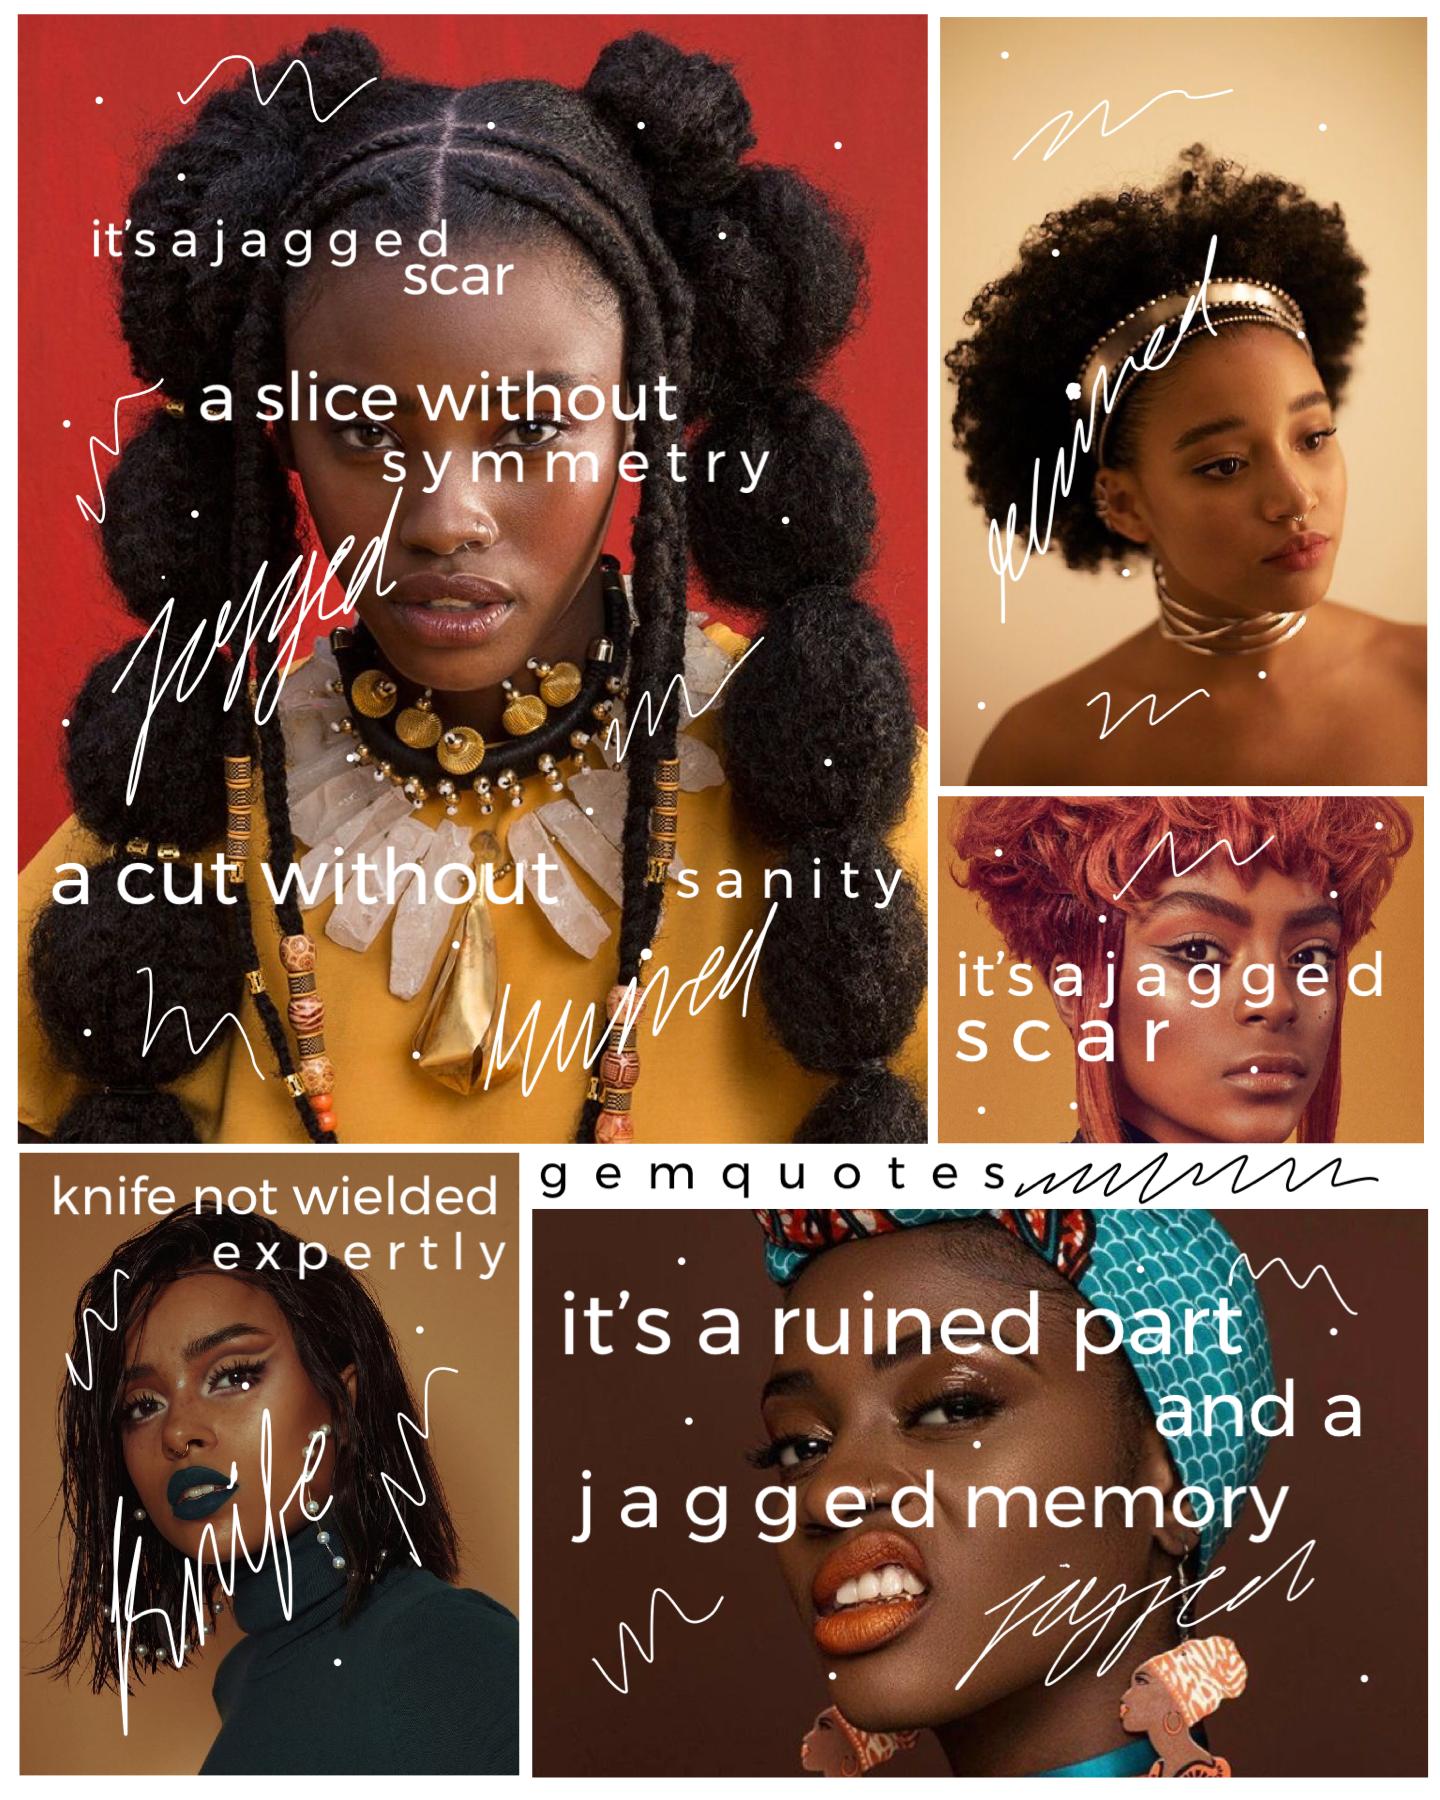 “🤍tap🤍”
Poem by me :) The #blm movement has elicited some really great responses, but sadly there’s still injustice with Brianna Taylor’s murderers, several other unsolved cases. So sending hope~~🖤